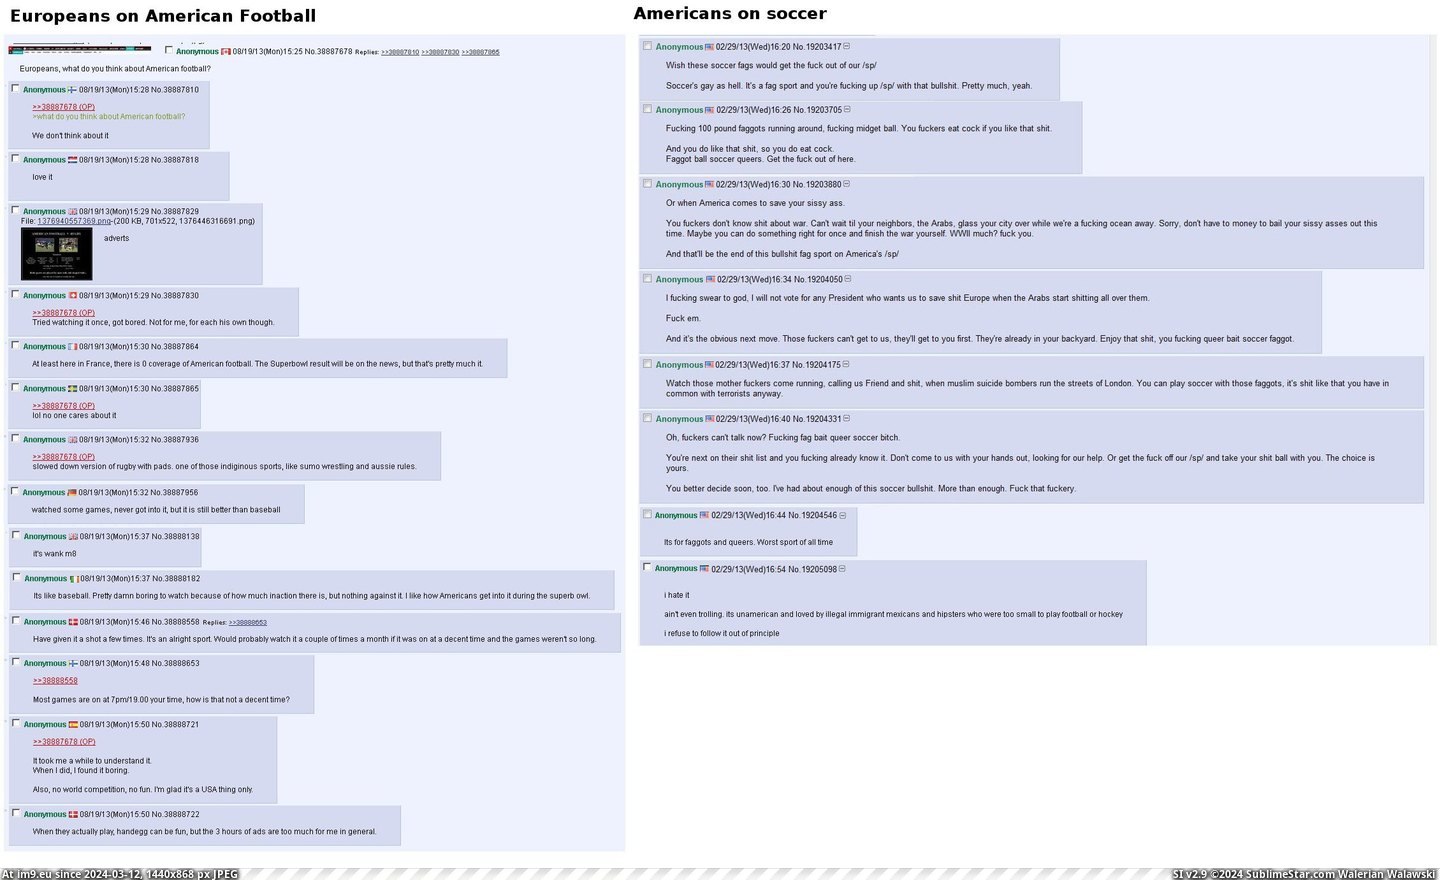 #4chan #Anon #Football #Discusses #Differences #European #American [4chan] Anon discusses the differences between European and American football Pic. (Bild von album My r/4CHAN favs))